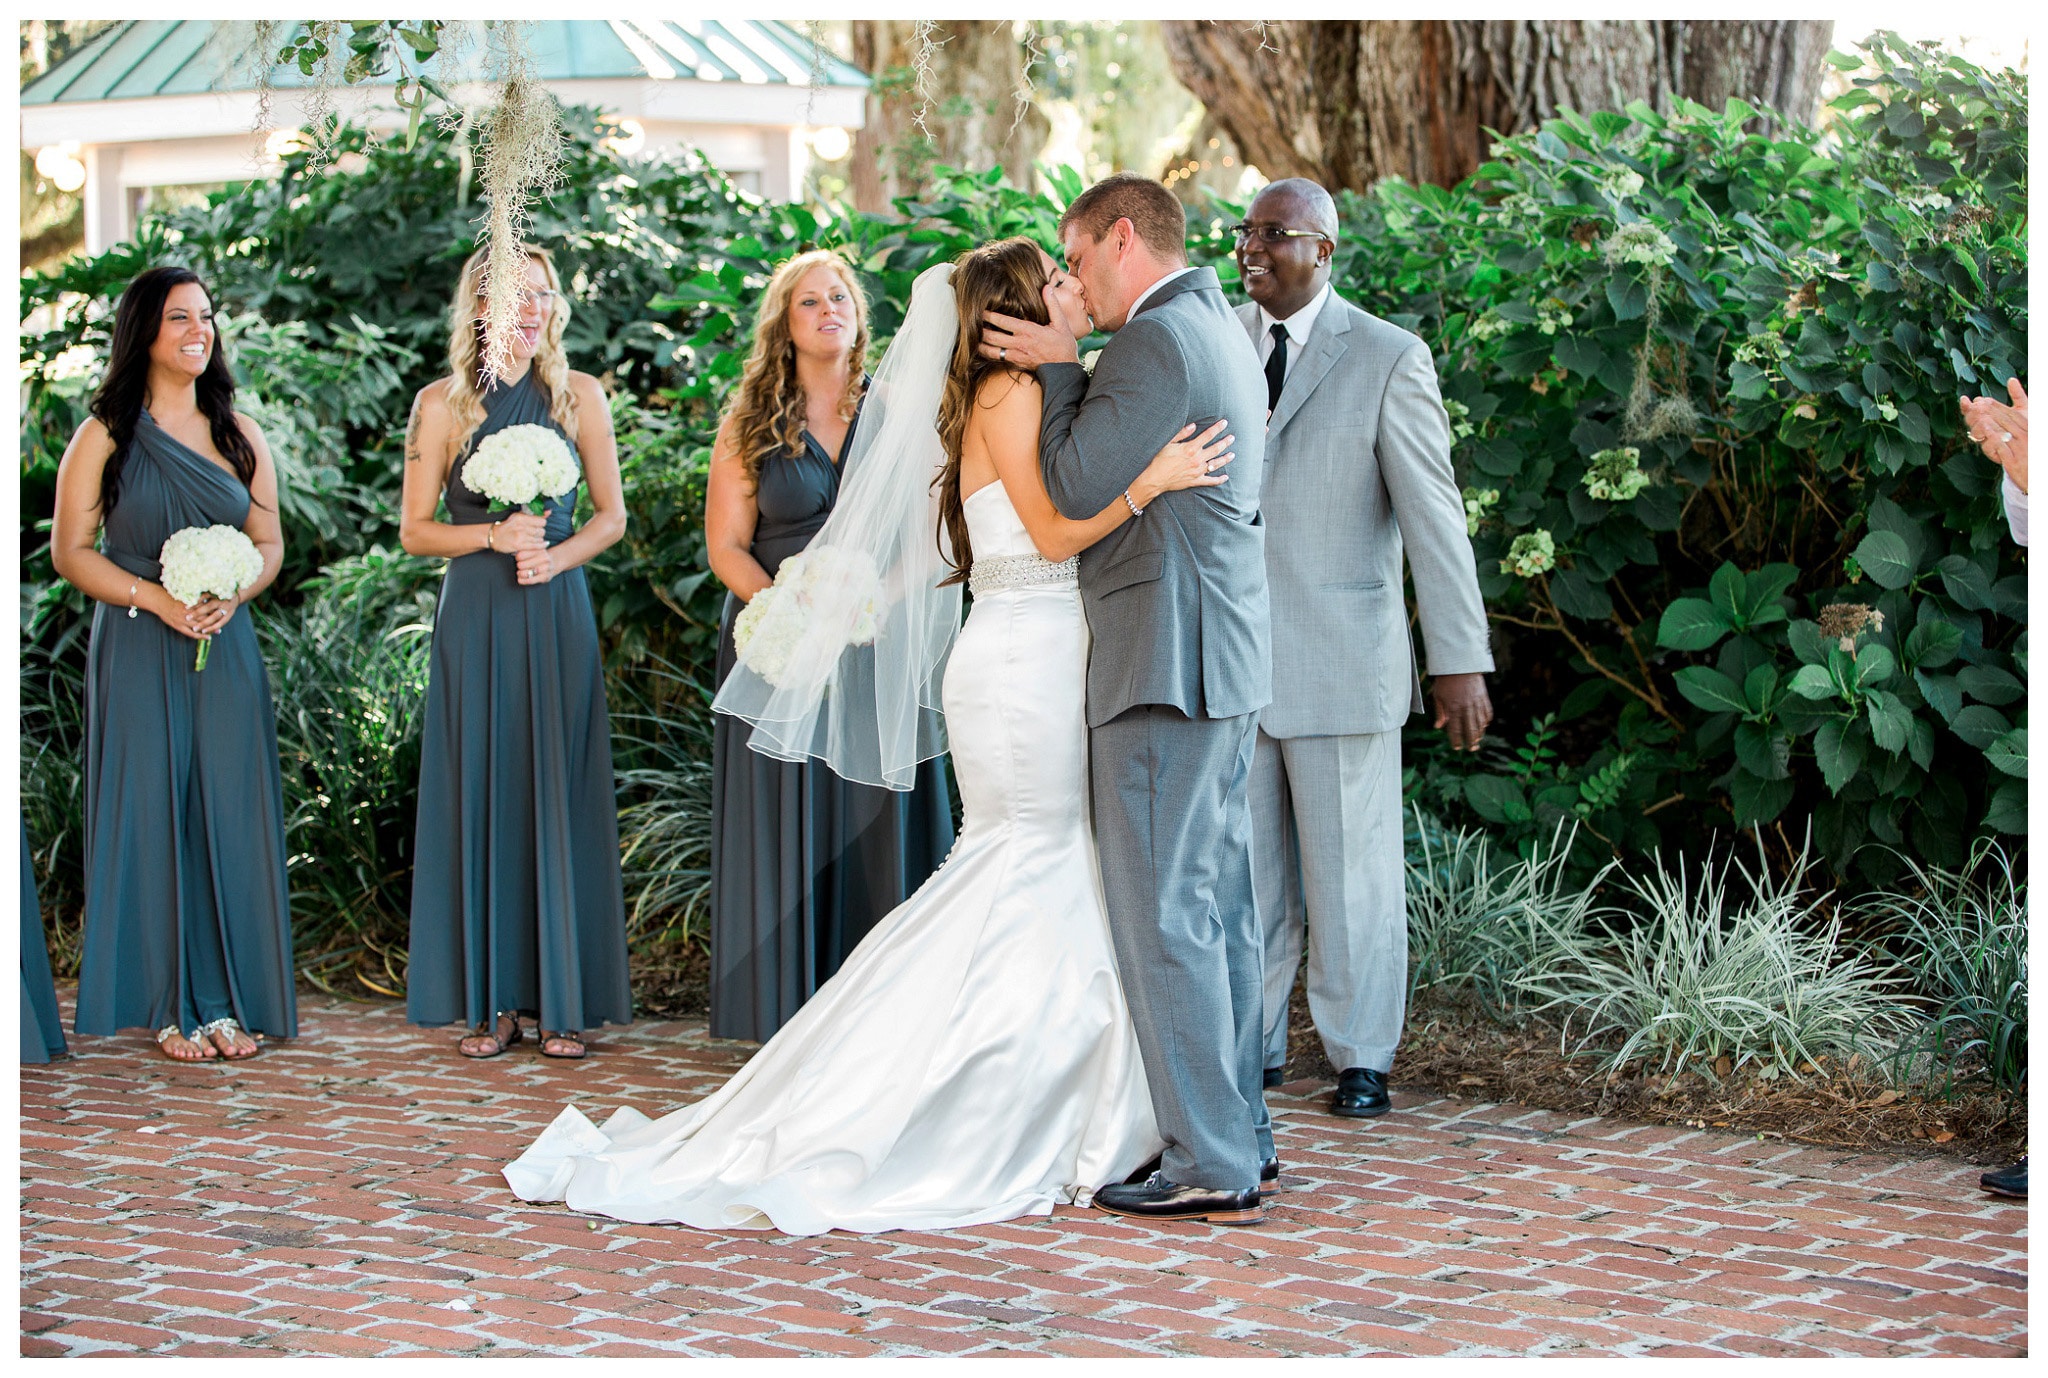 You may kiss the Bride - a passionate kiss while the pastor and bridesmaids look on. Kay and Josh's wedding at the Heritage Plantation, Pawleys Island, South Carolina on September 19, 2015 Heritage Plantation Southern wedding, Pawleys Island, South Carolina Venue and Catering: Heritage Club, Pawleys Island Music: Paul Matthews Entertainment Brides dress: The Little White Dress Cake: Buttercream Cakes and Catering Event Rentals: Eventworks Photographer: One Life Photography